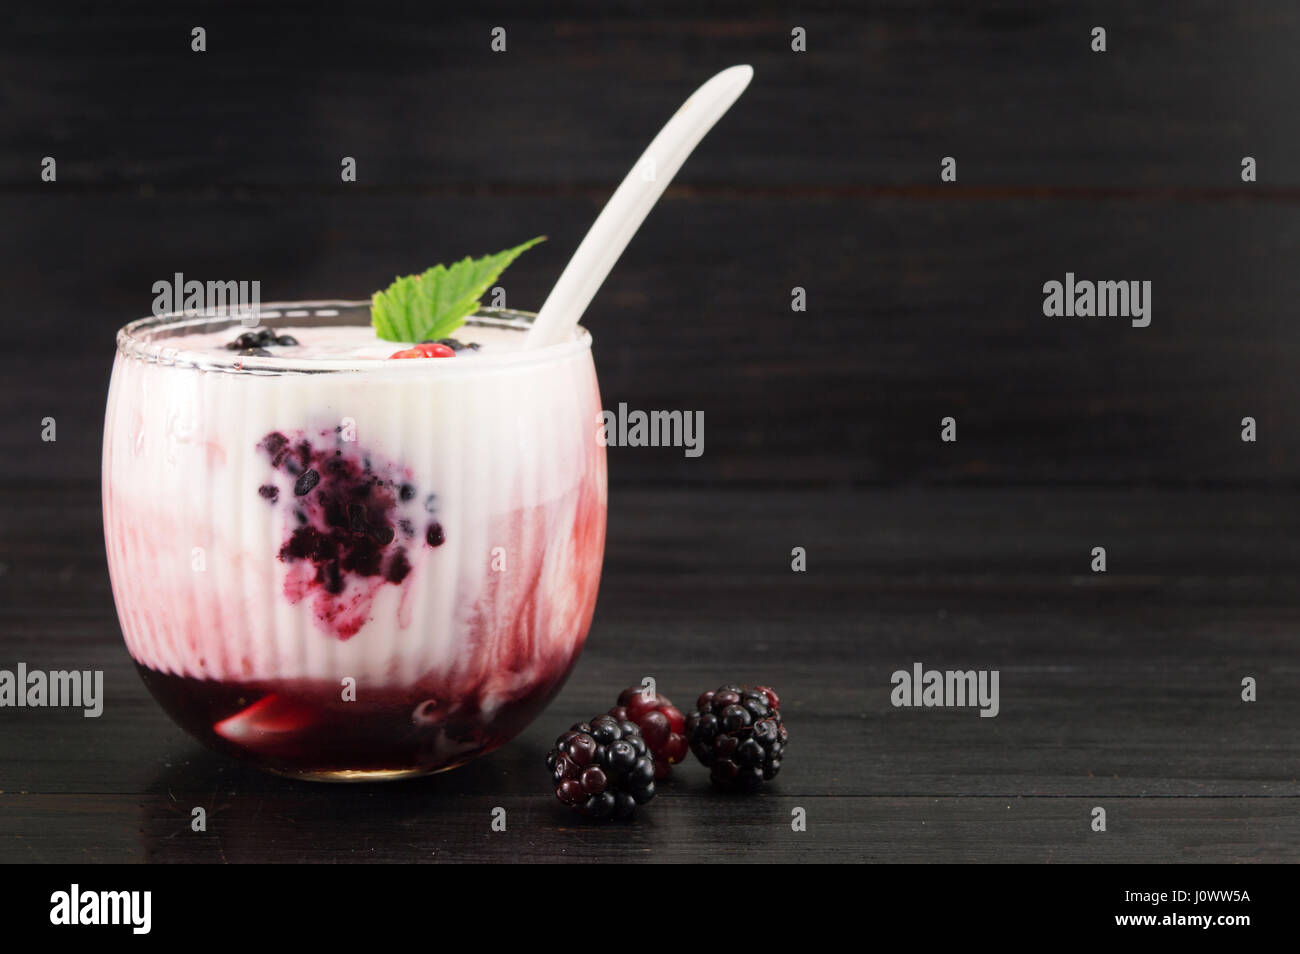 Homemade blackberry parfait served in a glass Stock Photo